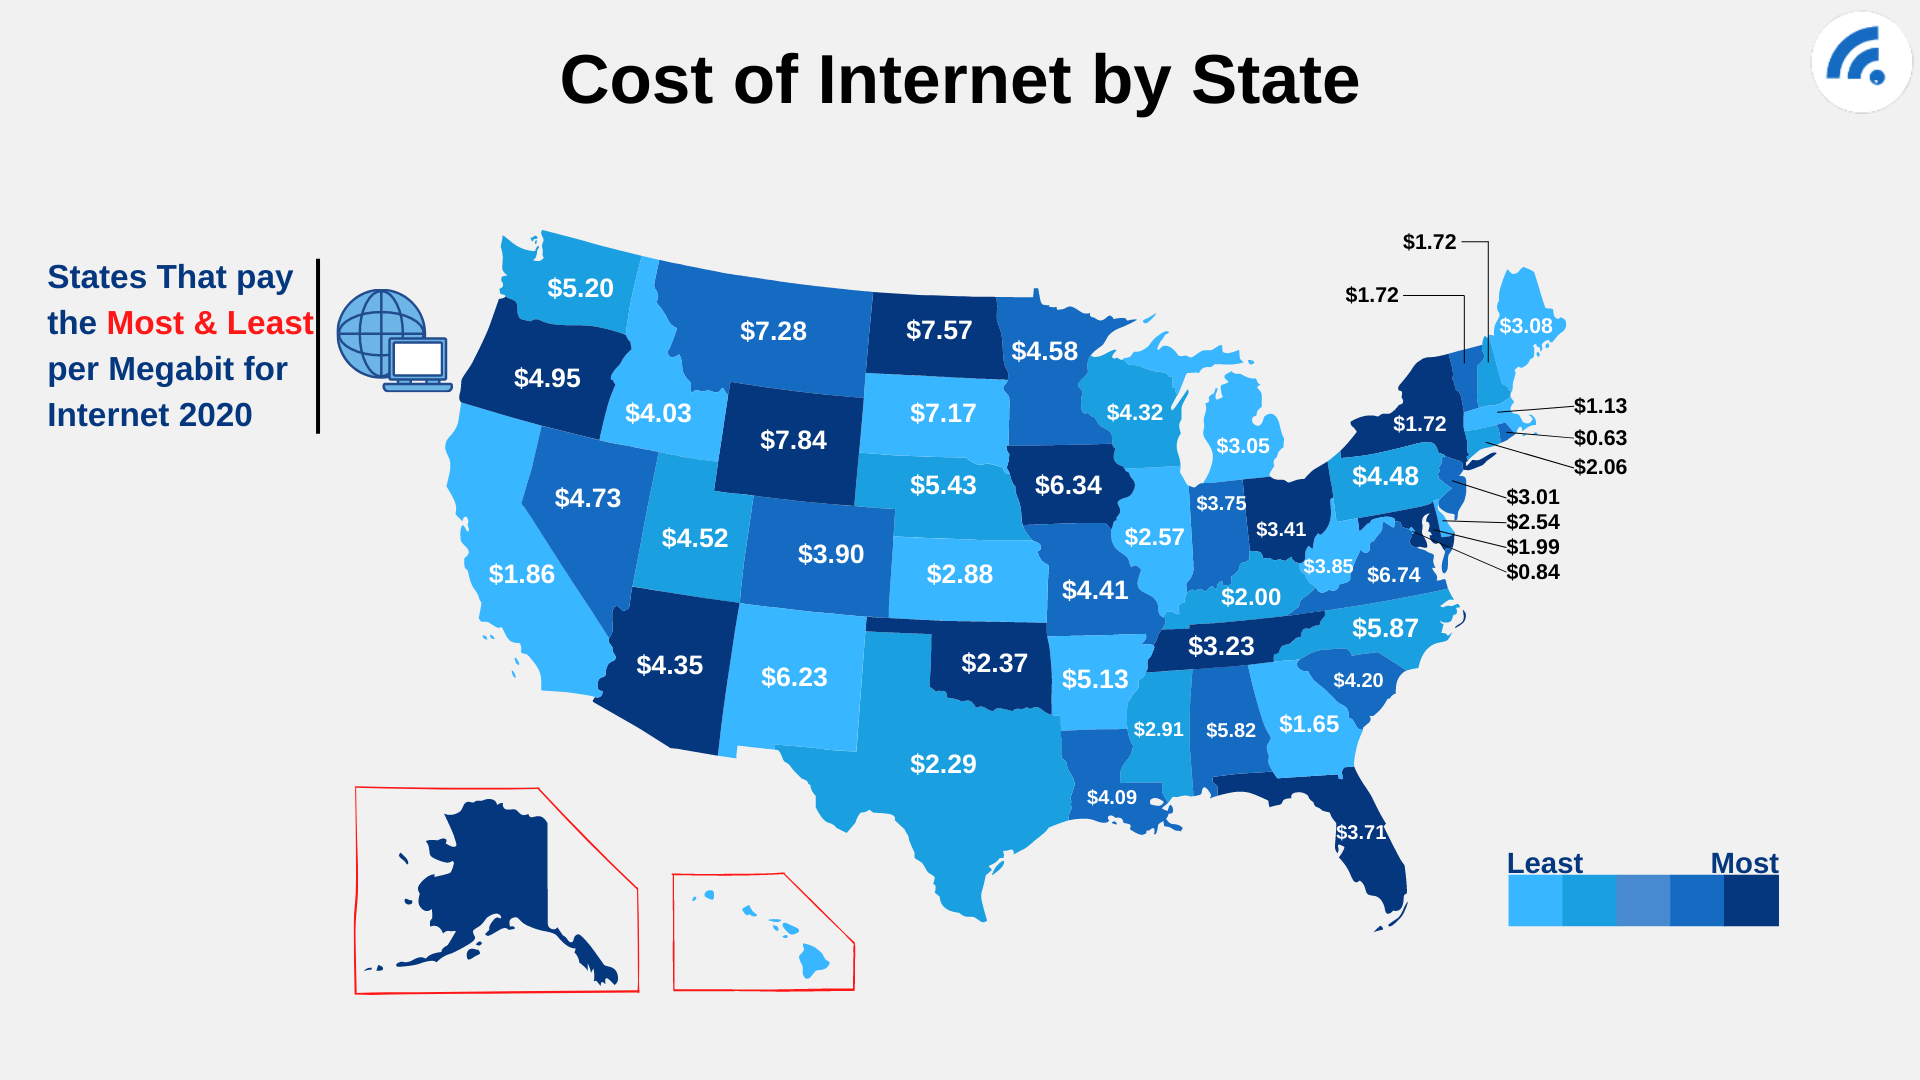 Cost of internet by state